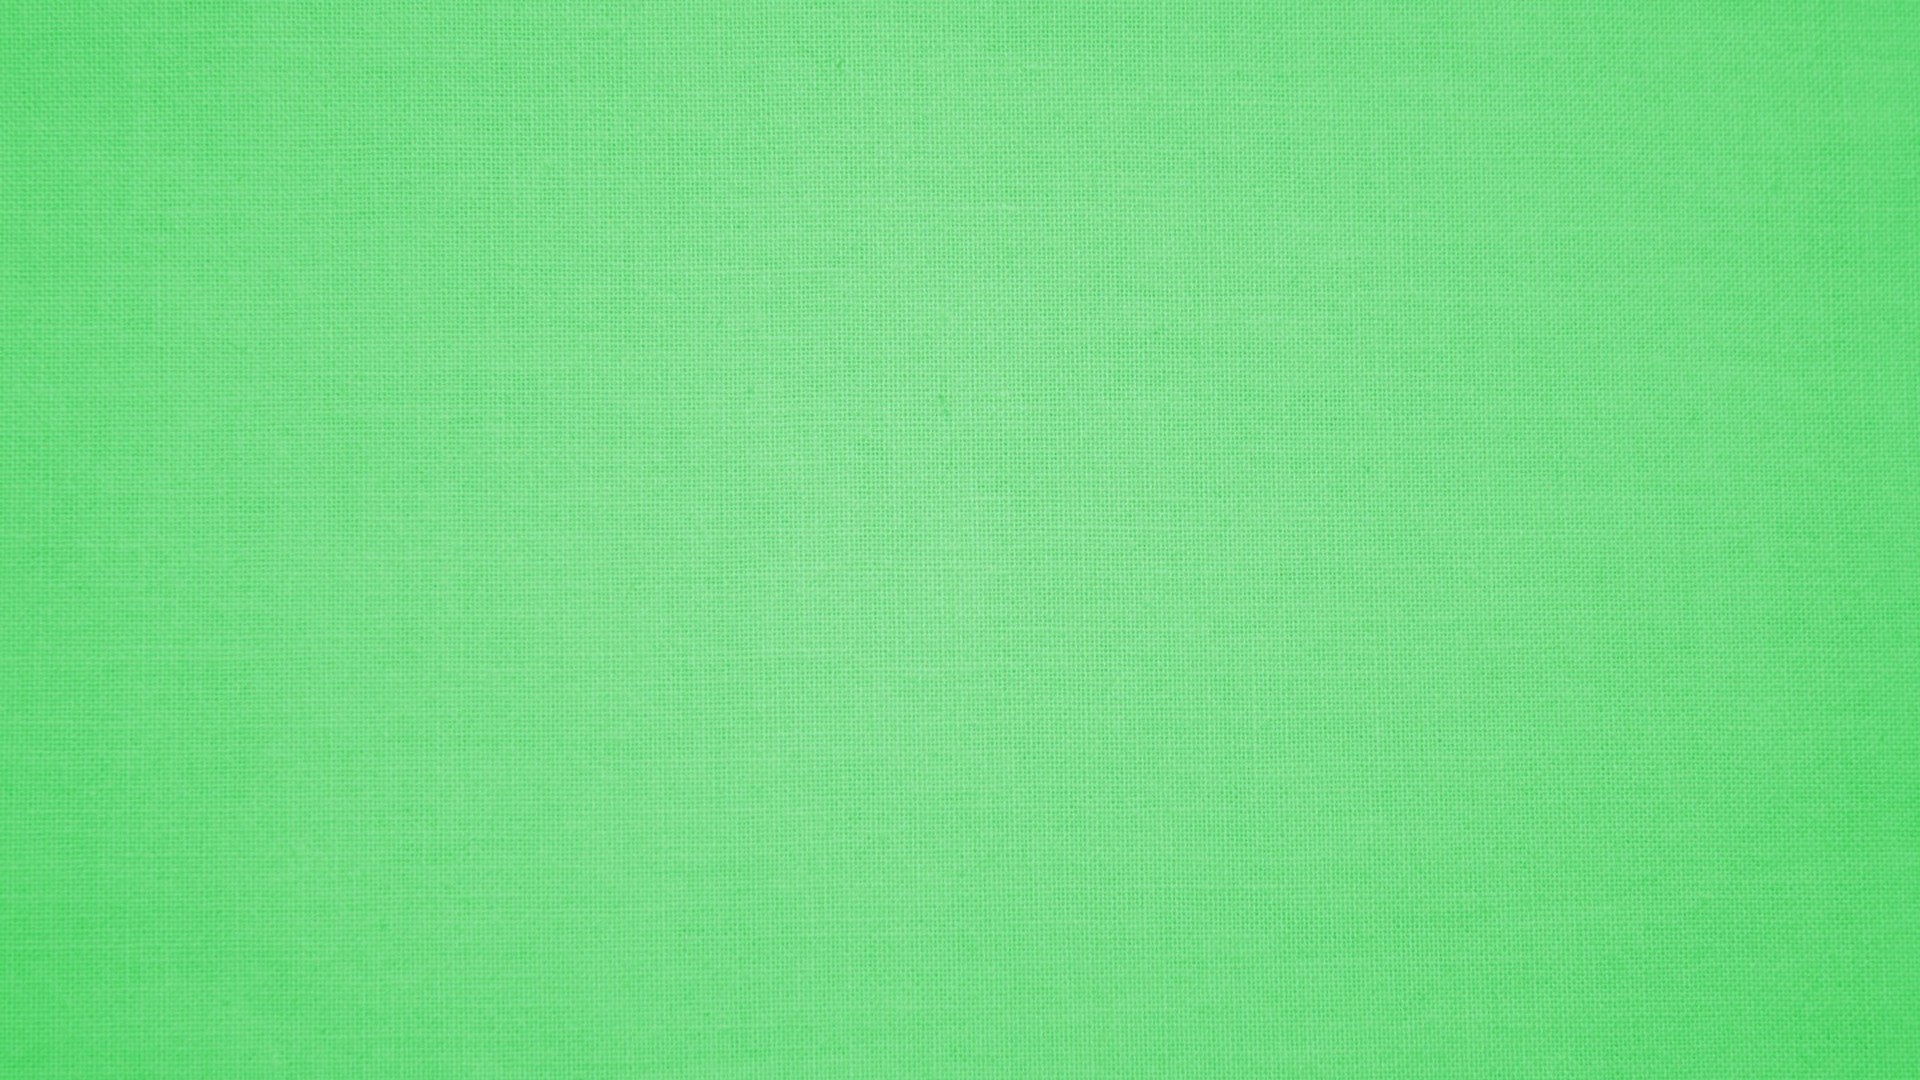 Wallpaper HD Green Colour with image resolution 1920x1080 pixel. You can make this wallpaper for your Desktop Computer Backgrounds, Mac Wallpapers, Android Lock screen or iPhone Screensavers